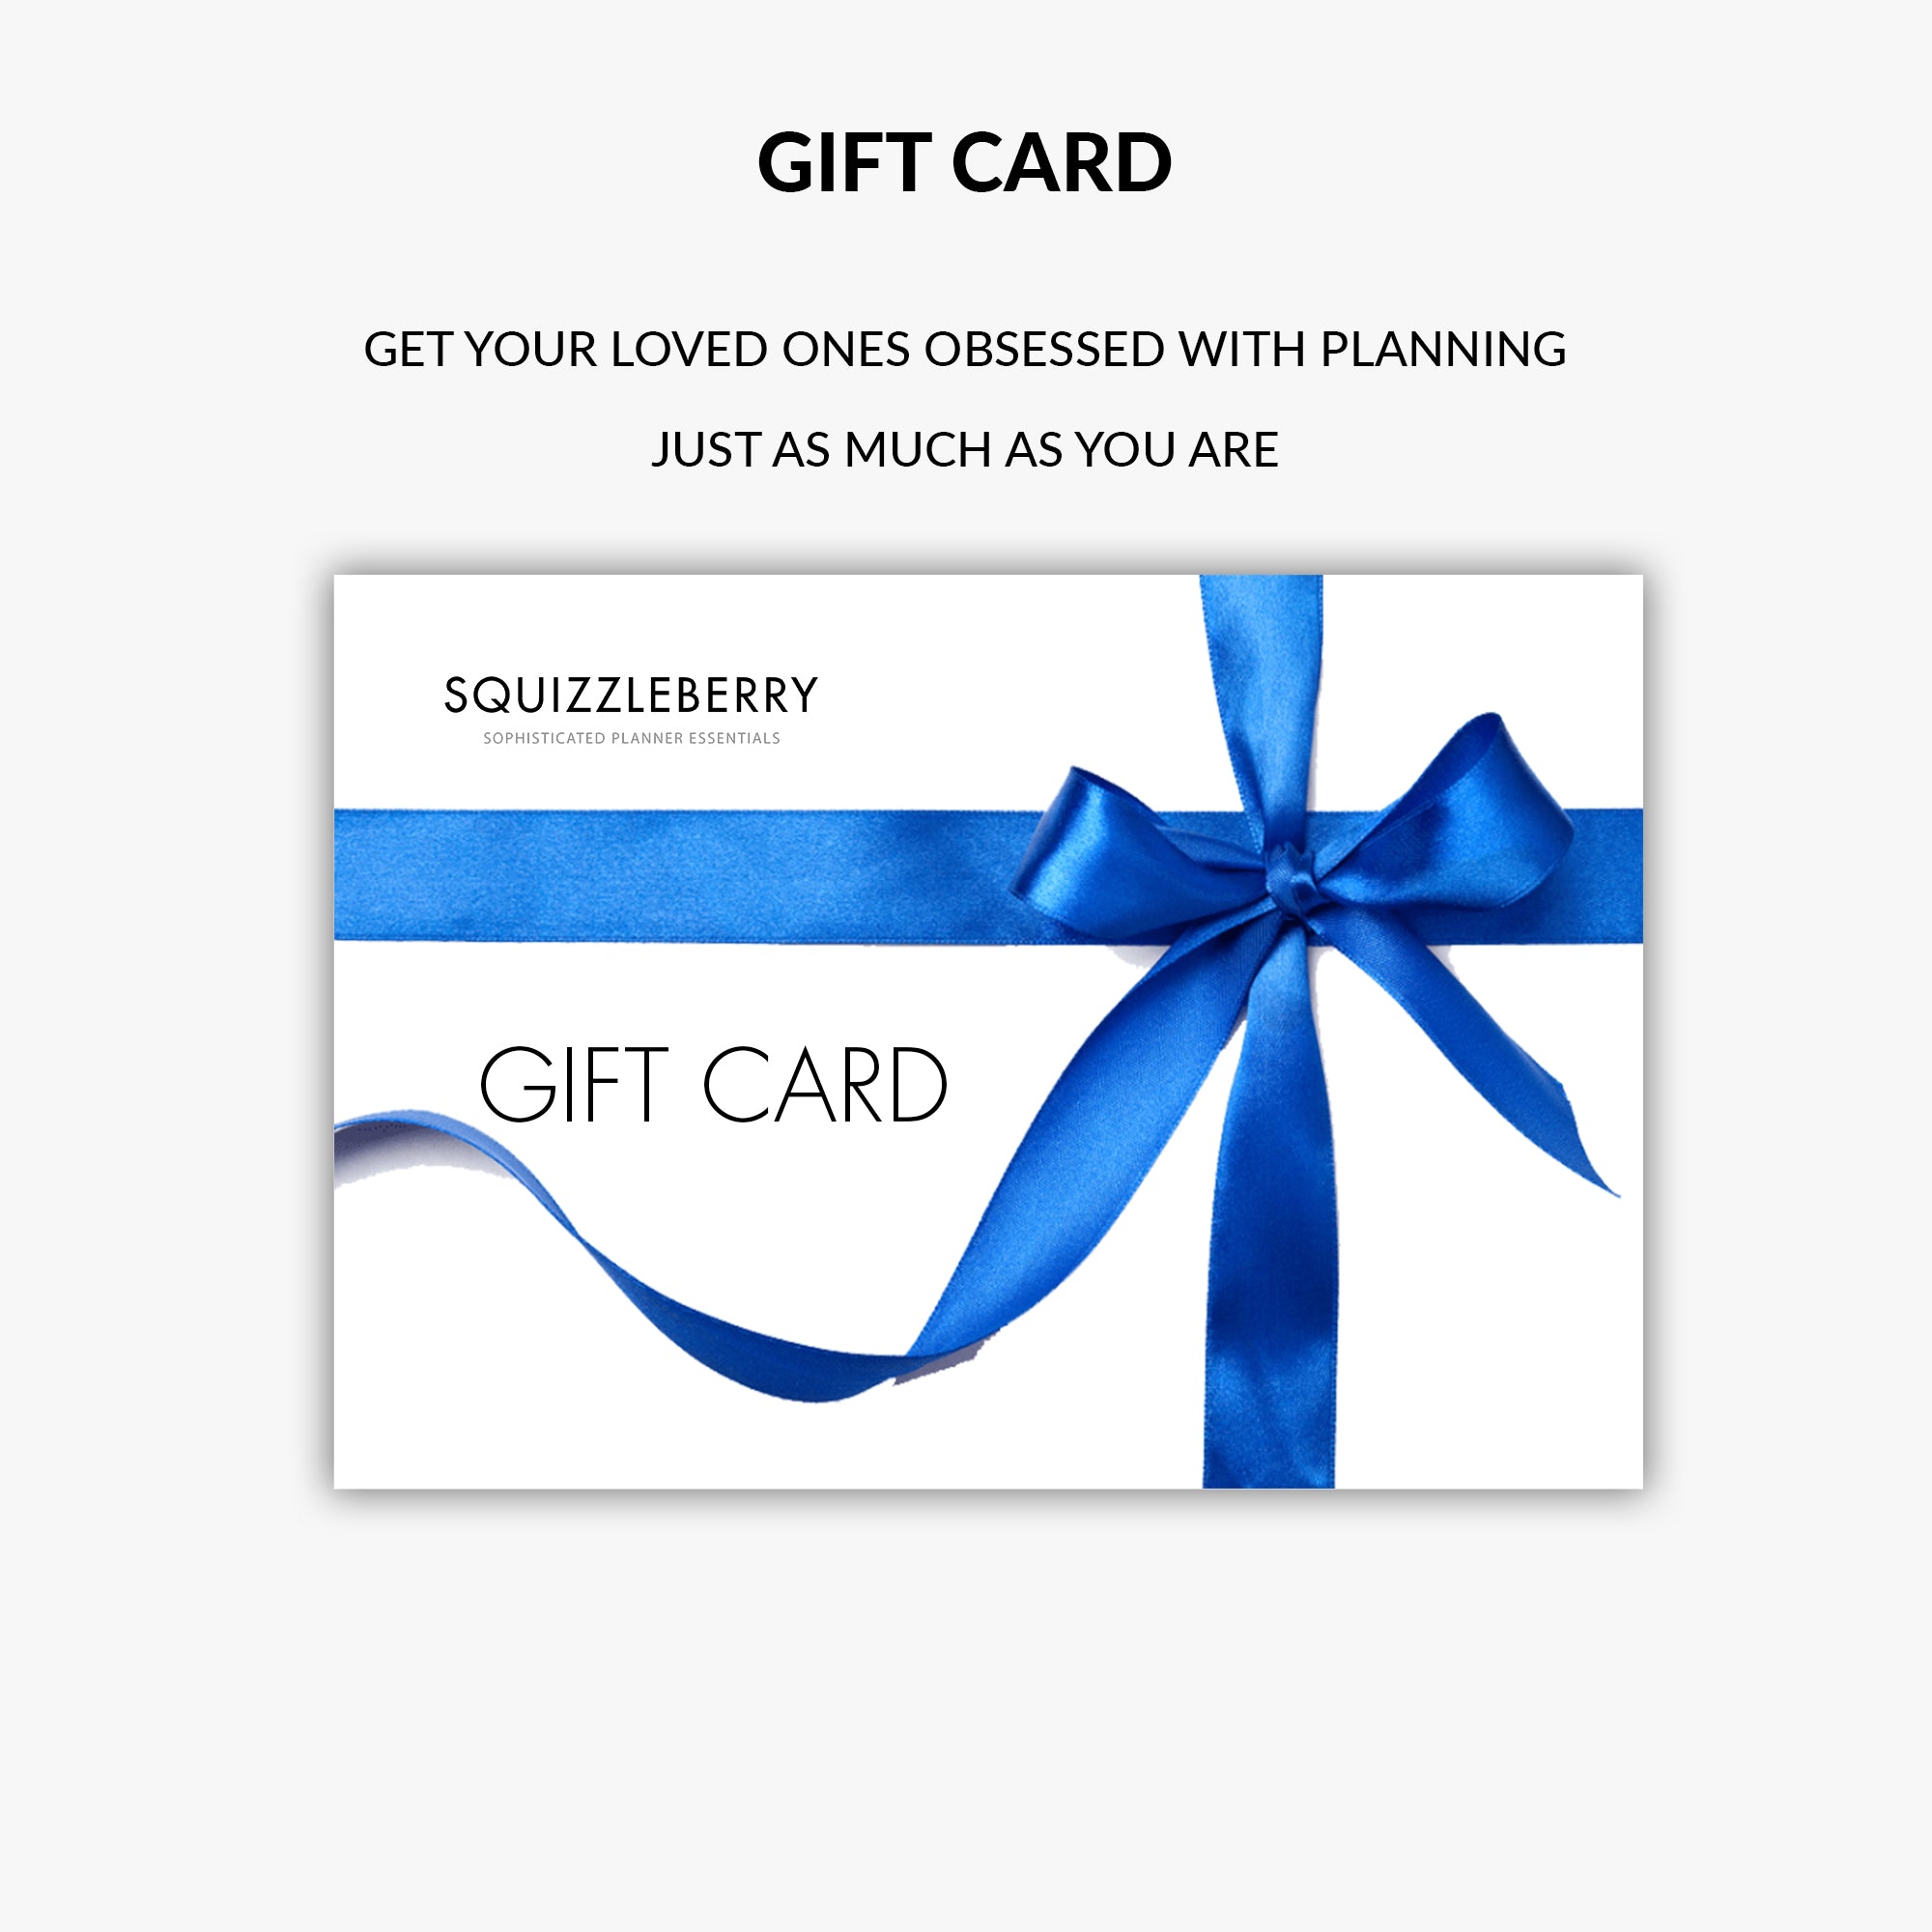 Squizzleberry gift card